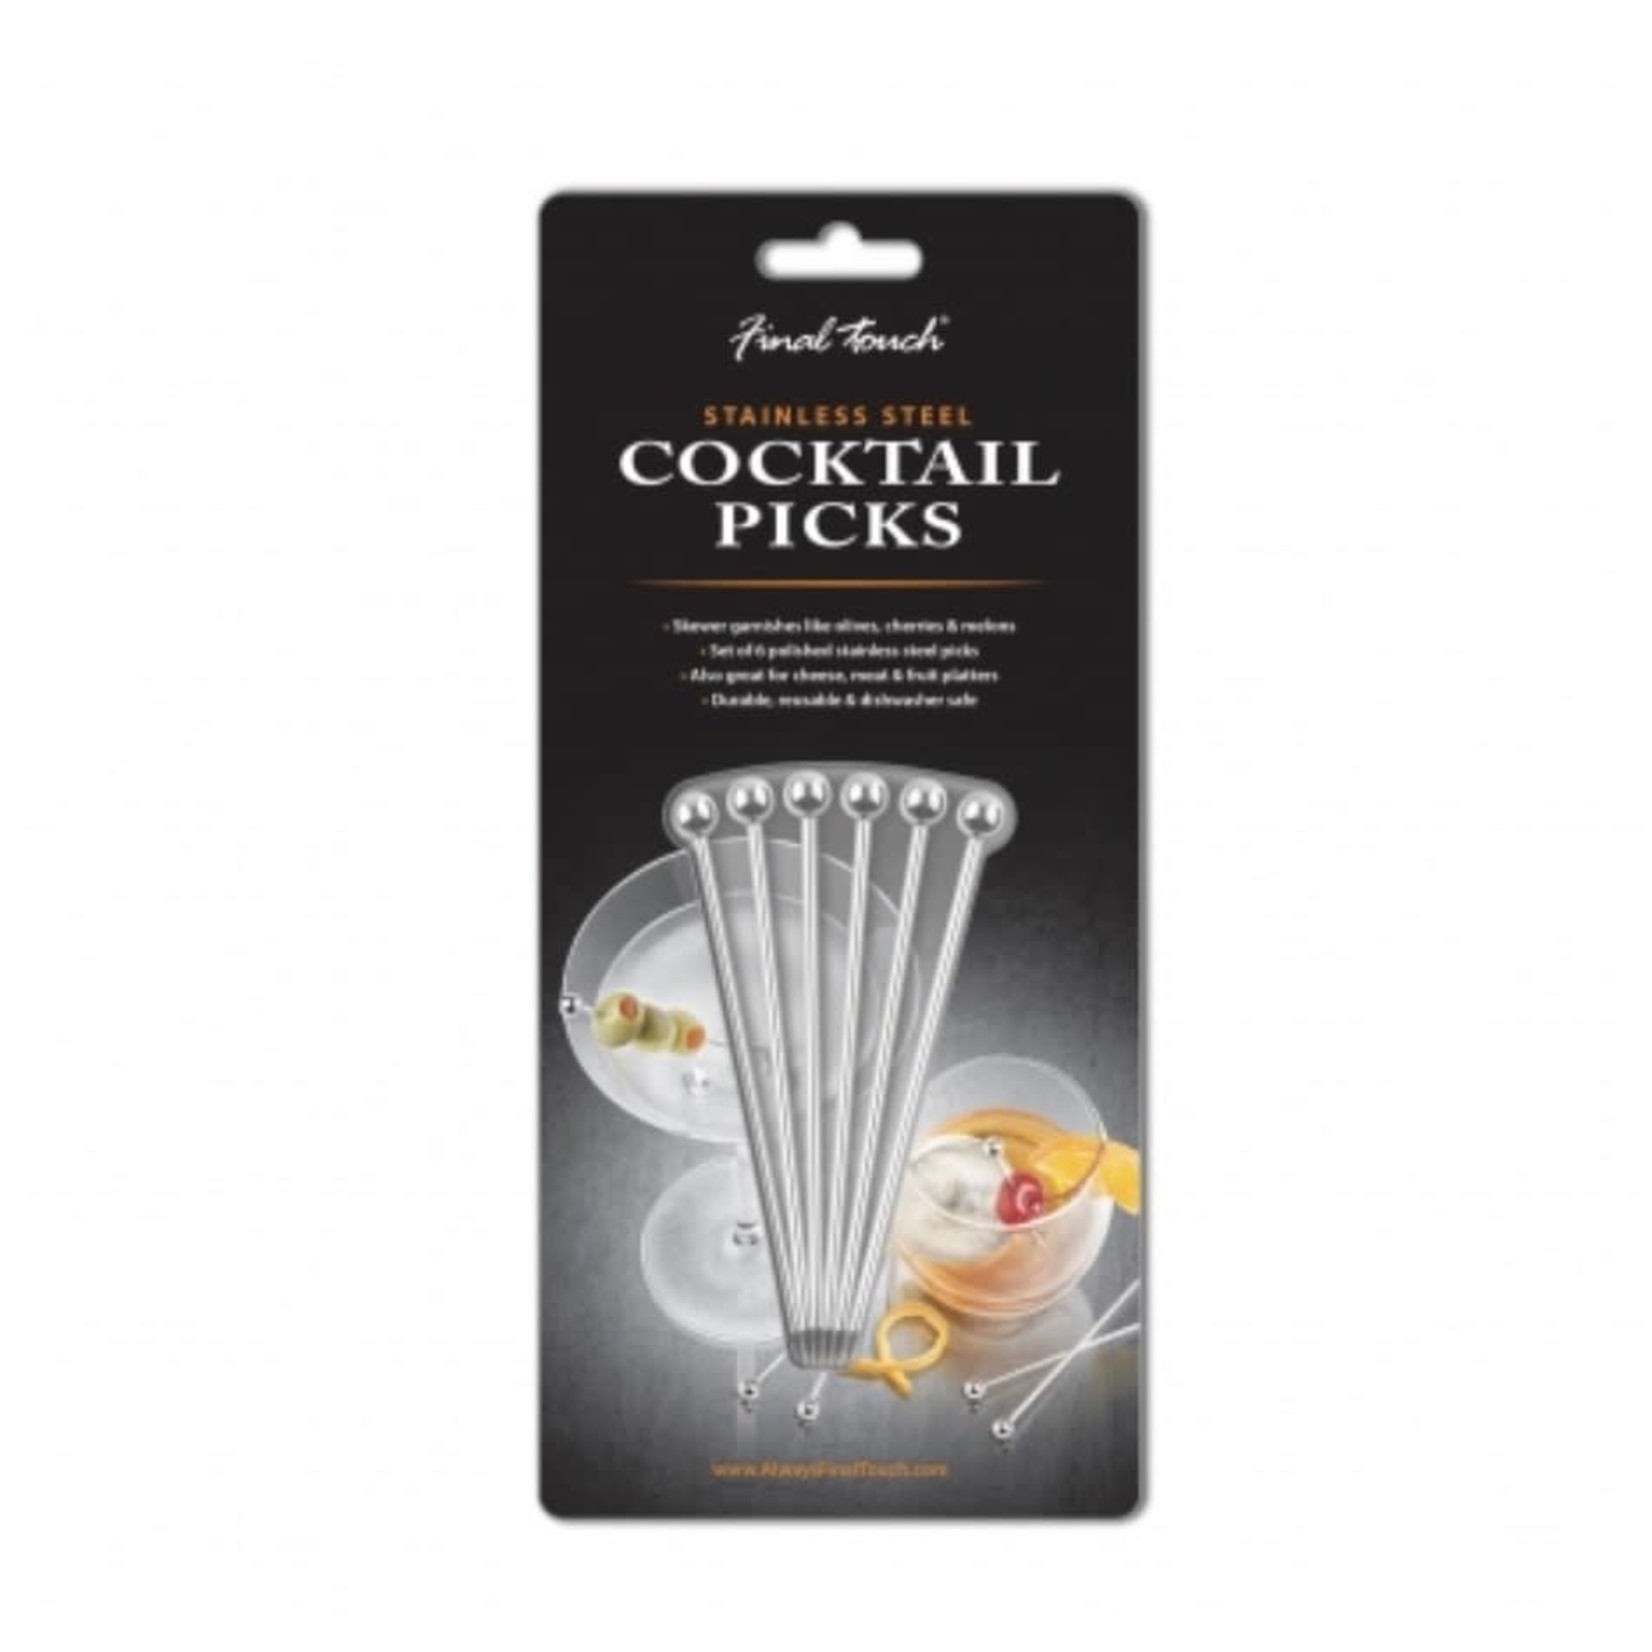 FINAL TOUCH FINAL TOUCH Cocktail Picks S/6 - Stainless